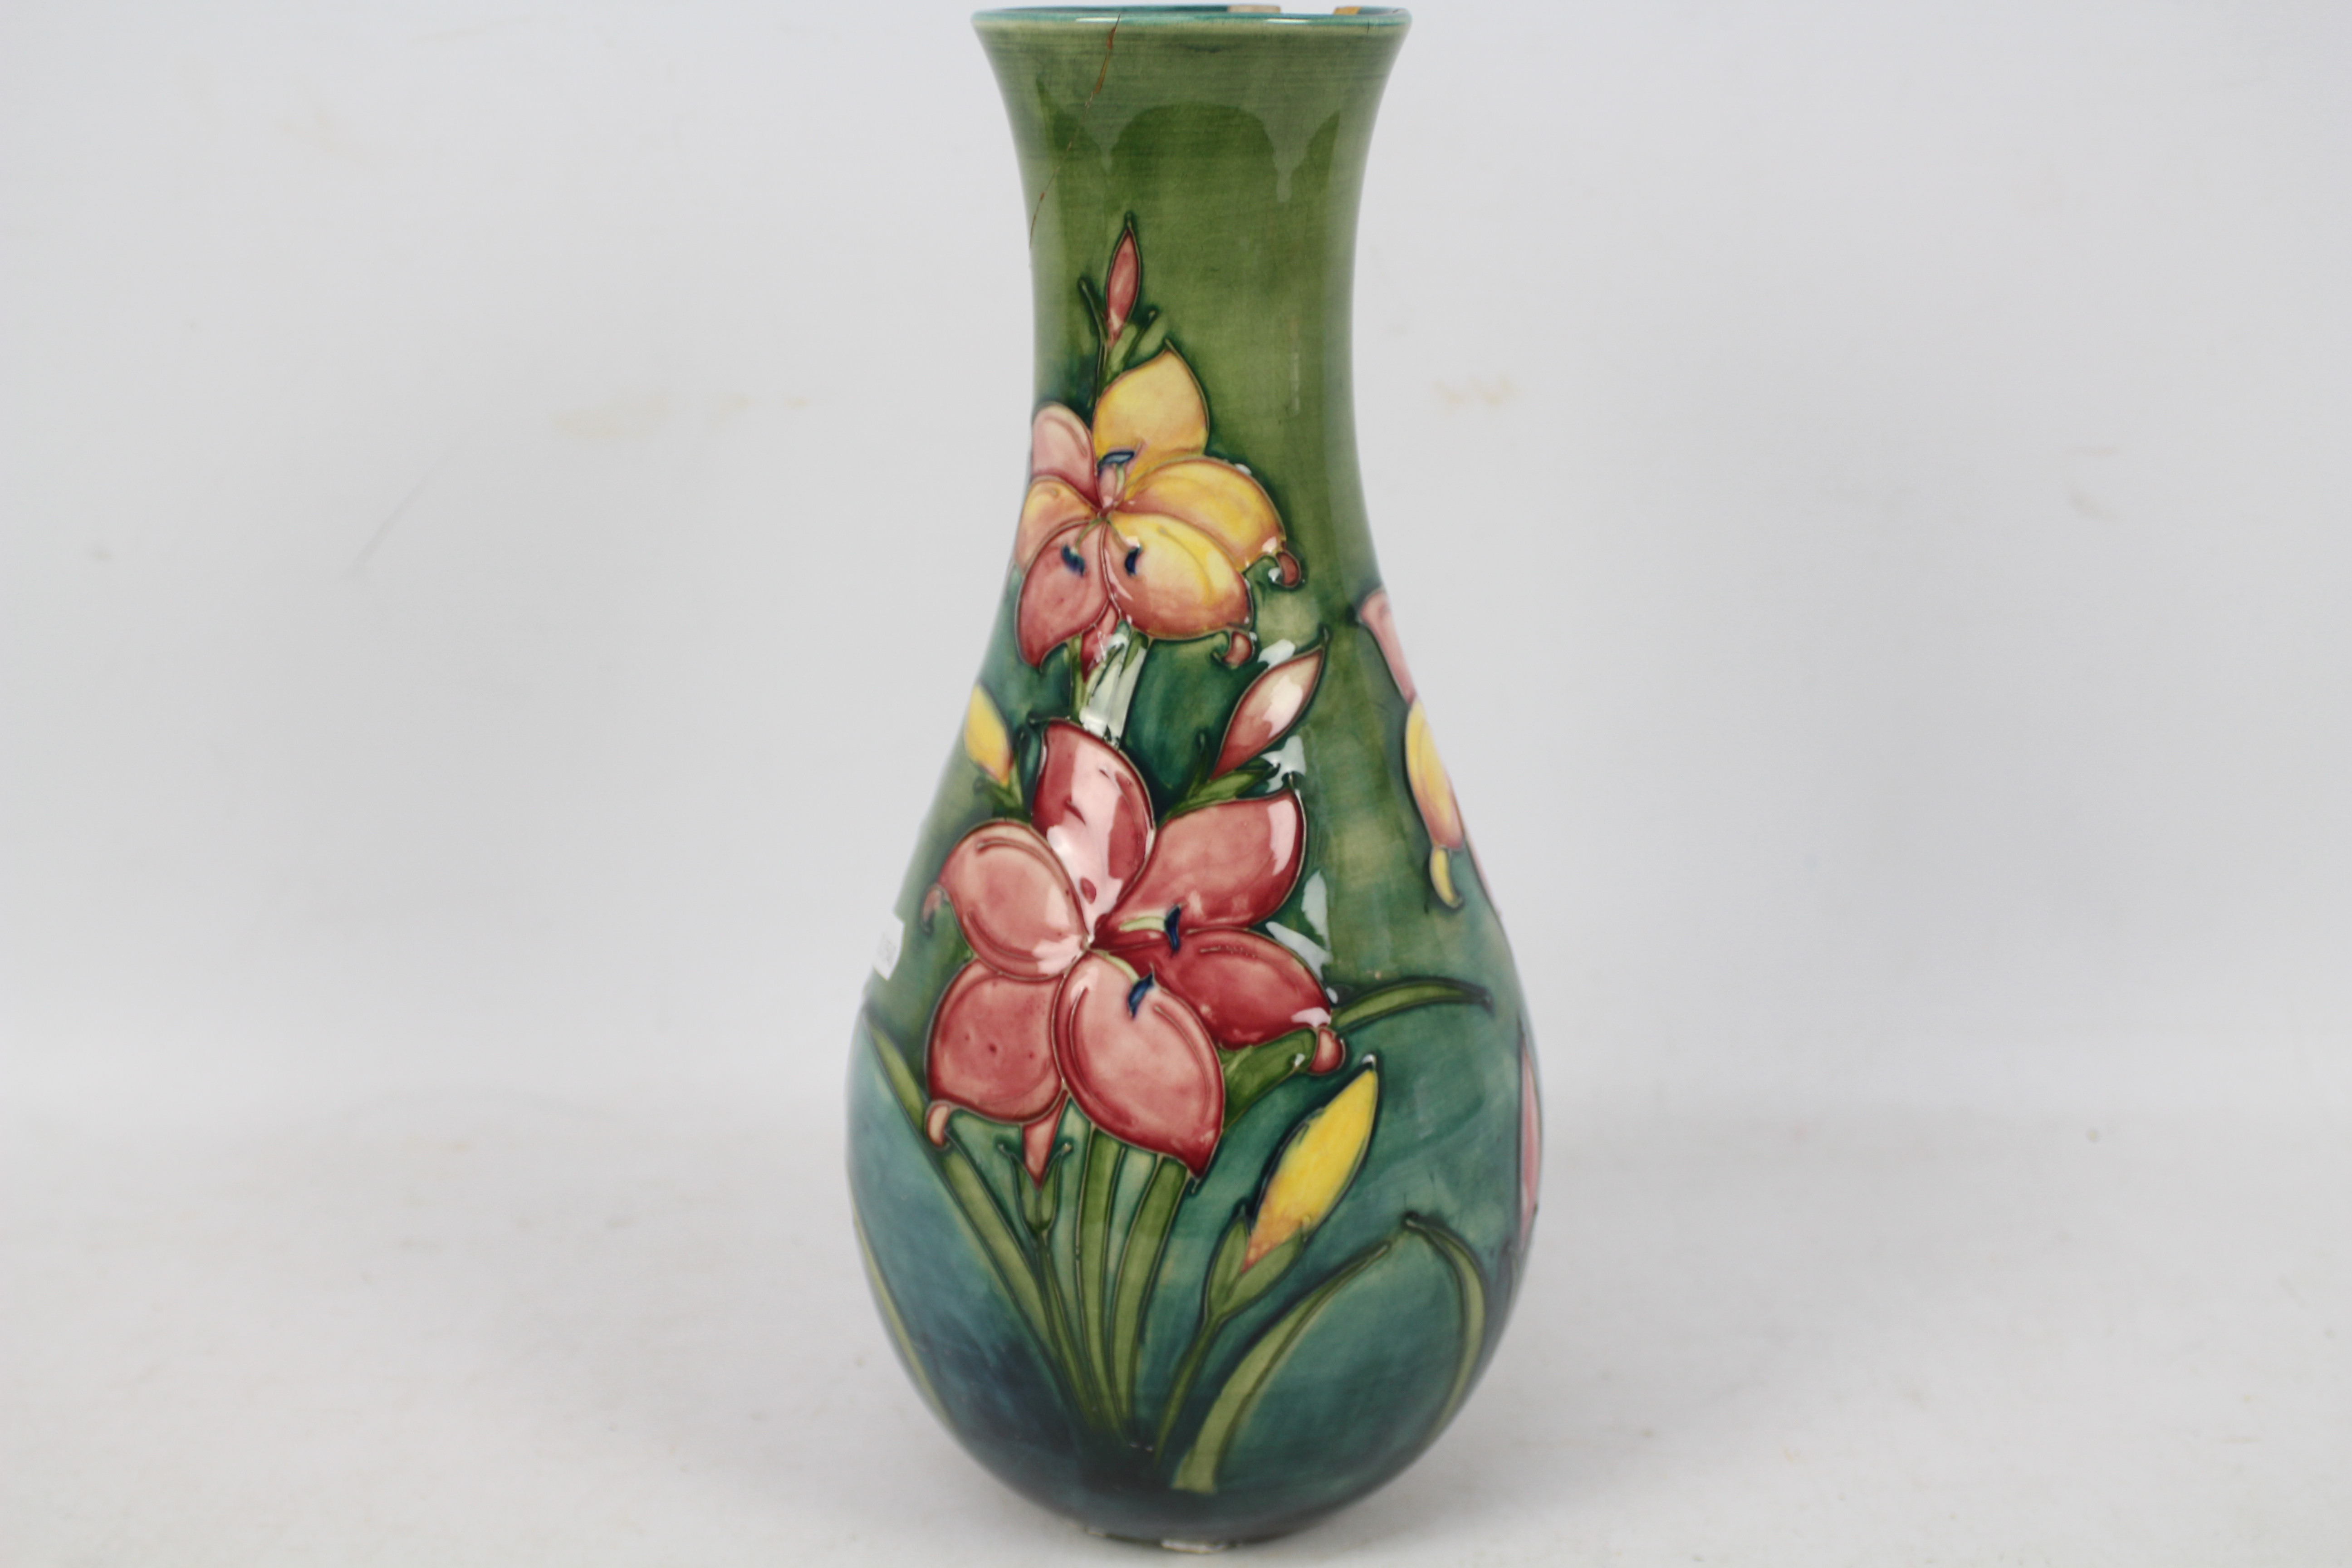 Moorcroft - A Moorcroft pottery baluster vase decorated in the Freesia pattern against a green